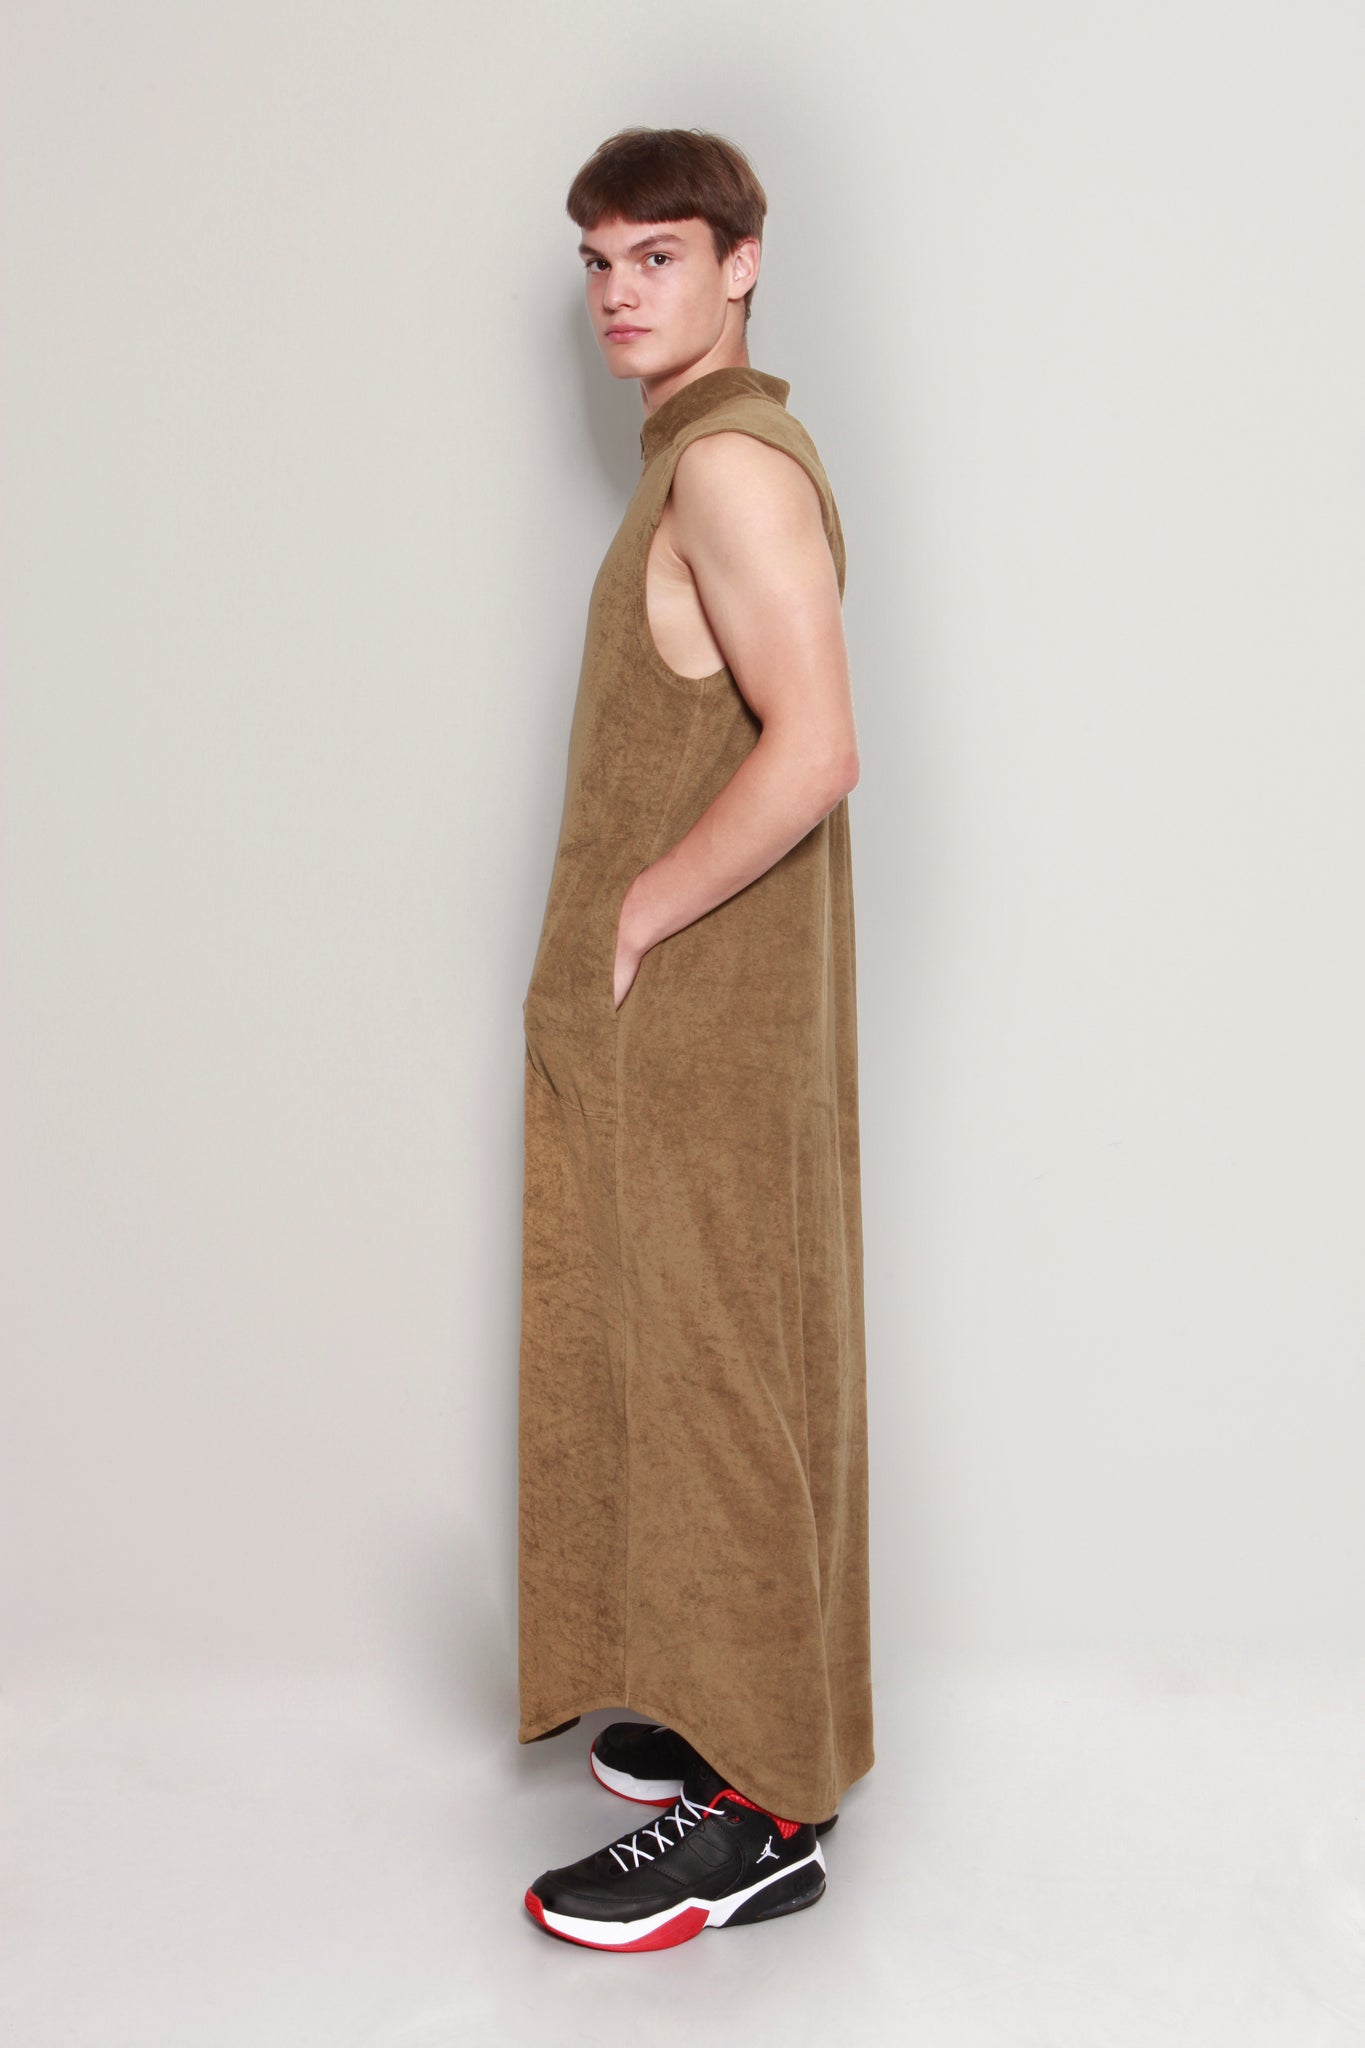 Kaftan Liberall. Style: Donnie - unisex, no sleeve, green. Photo by Eva Roefs.